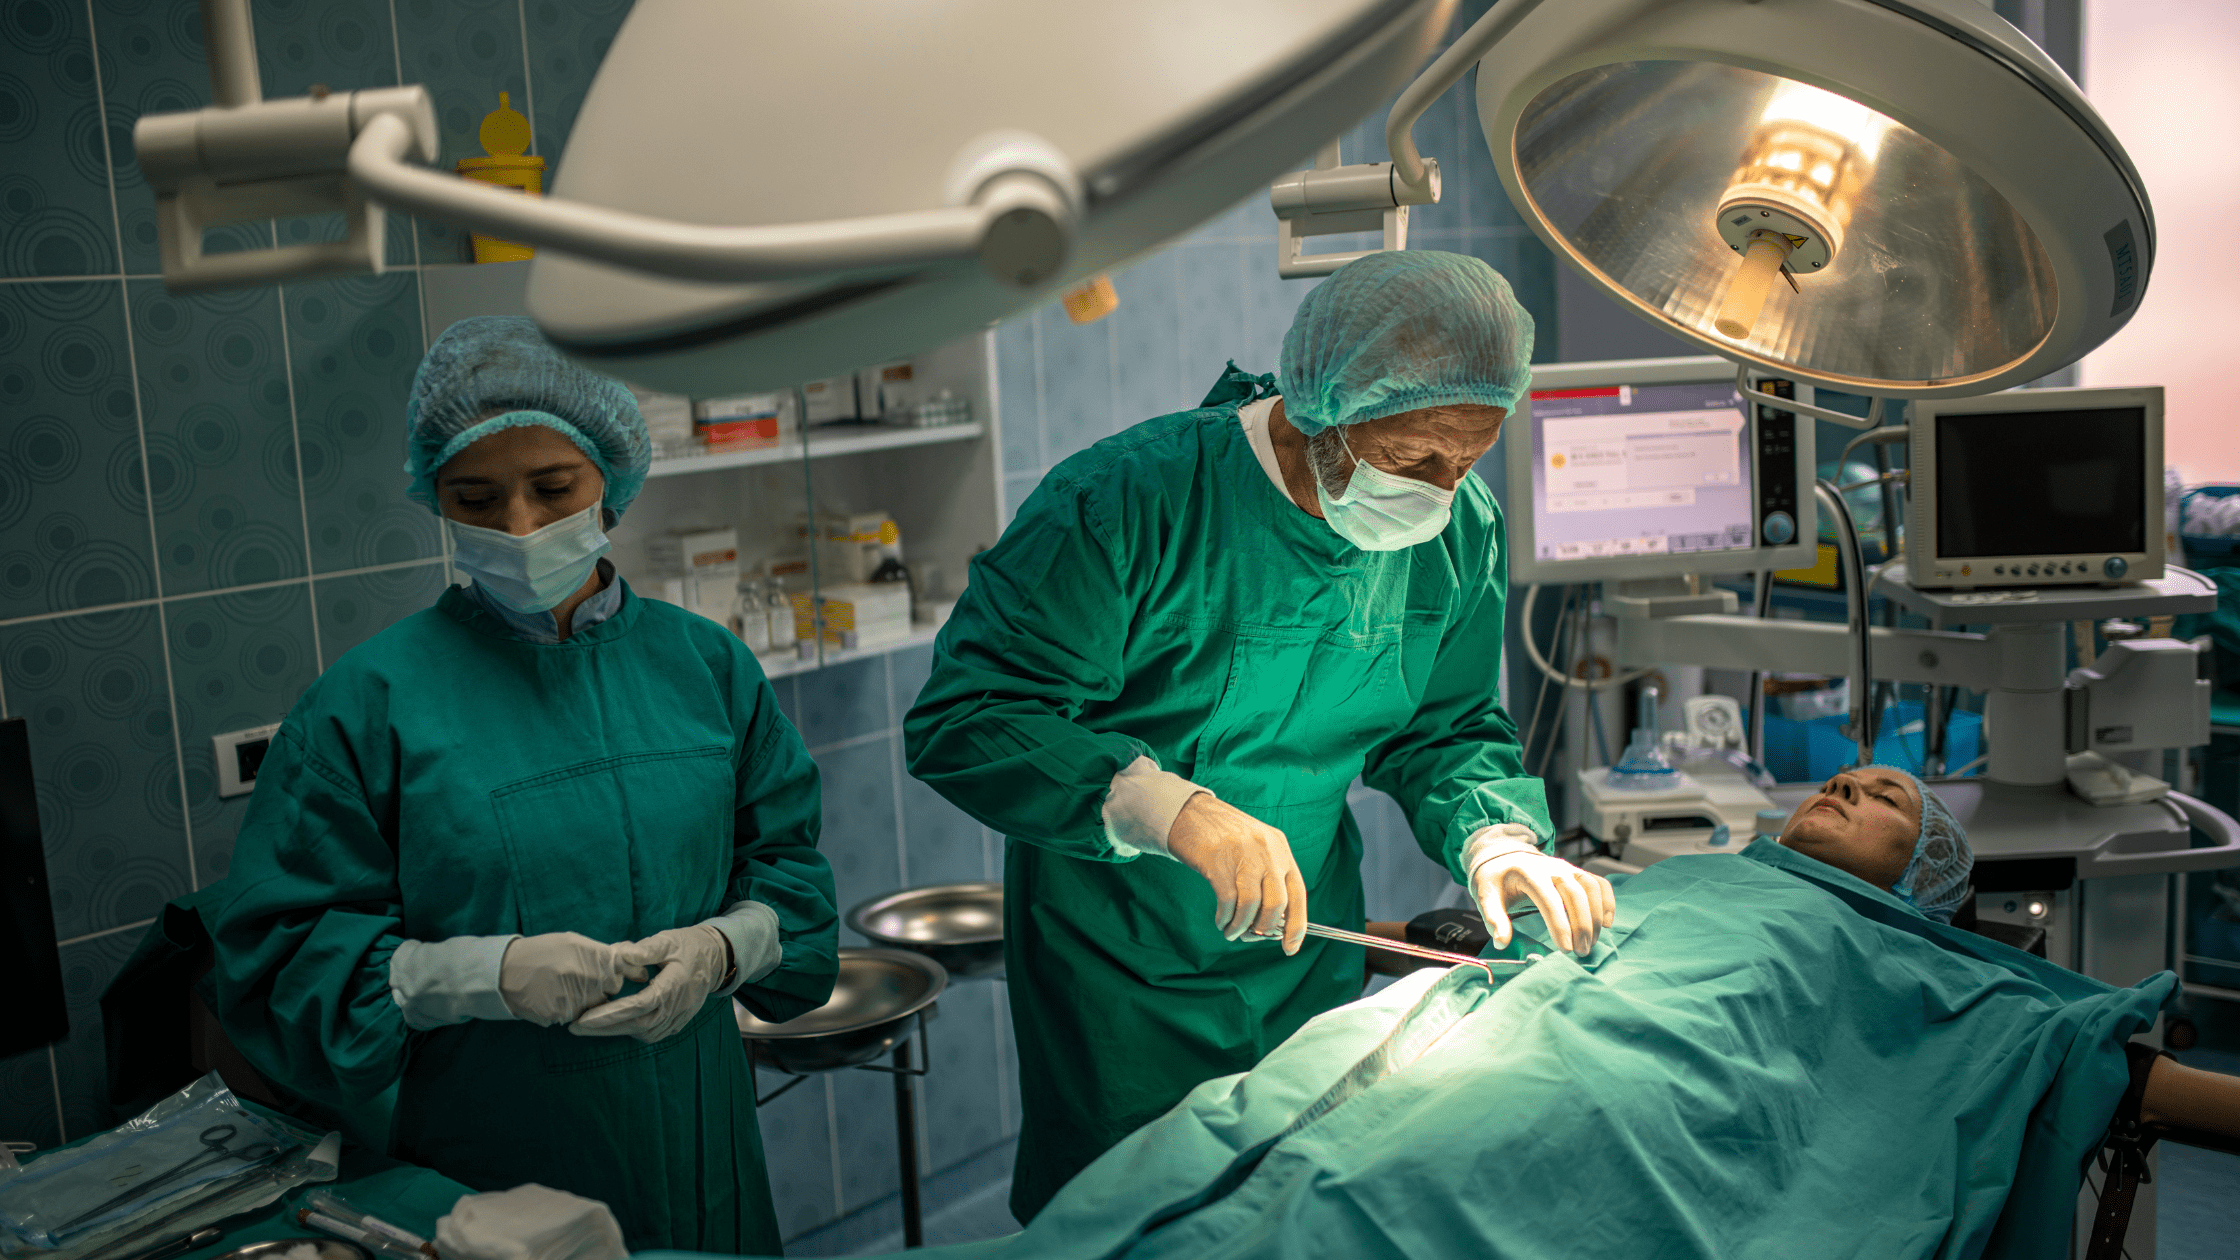 Doctors performing surgery on a patient in an operating room.